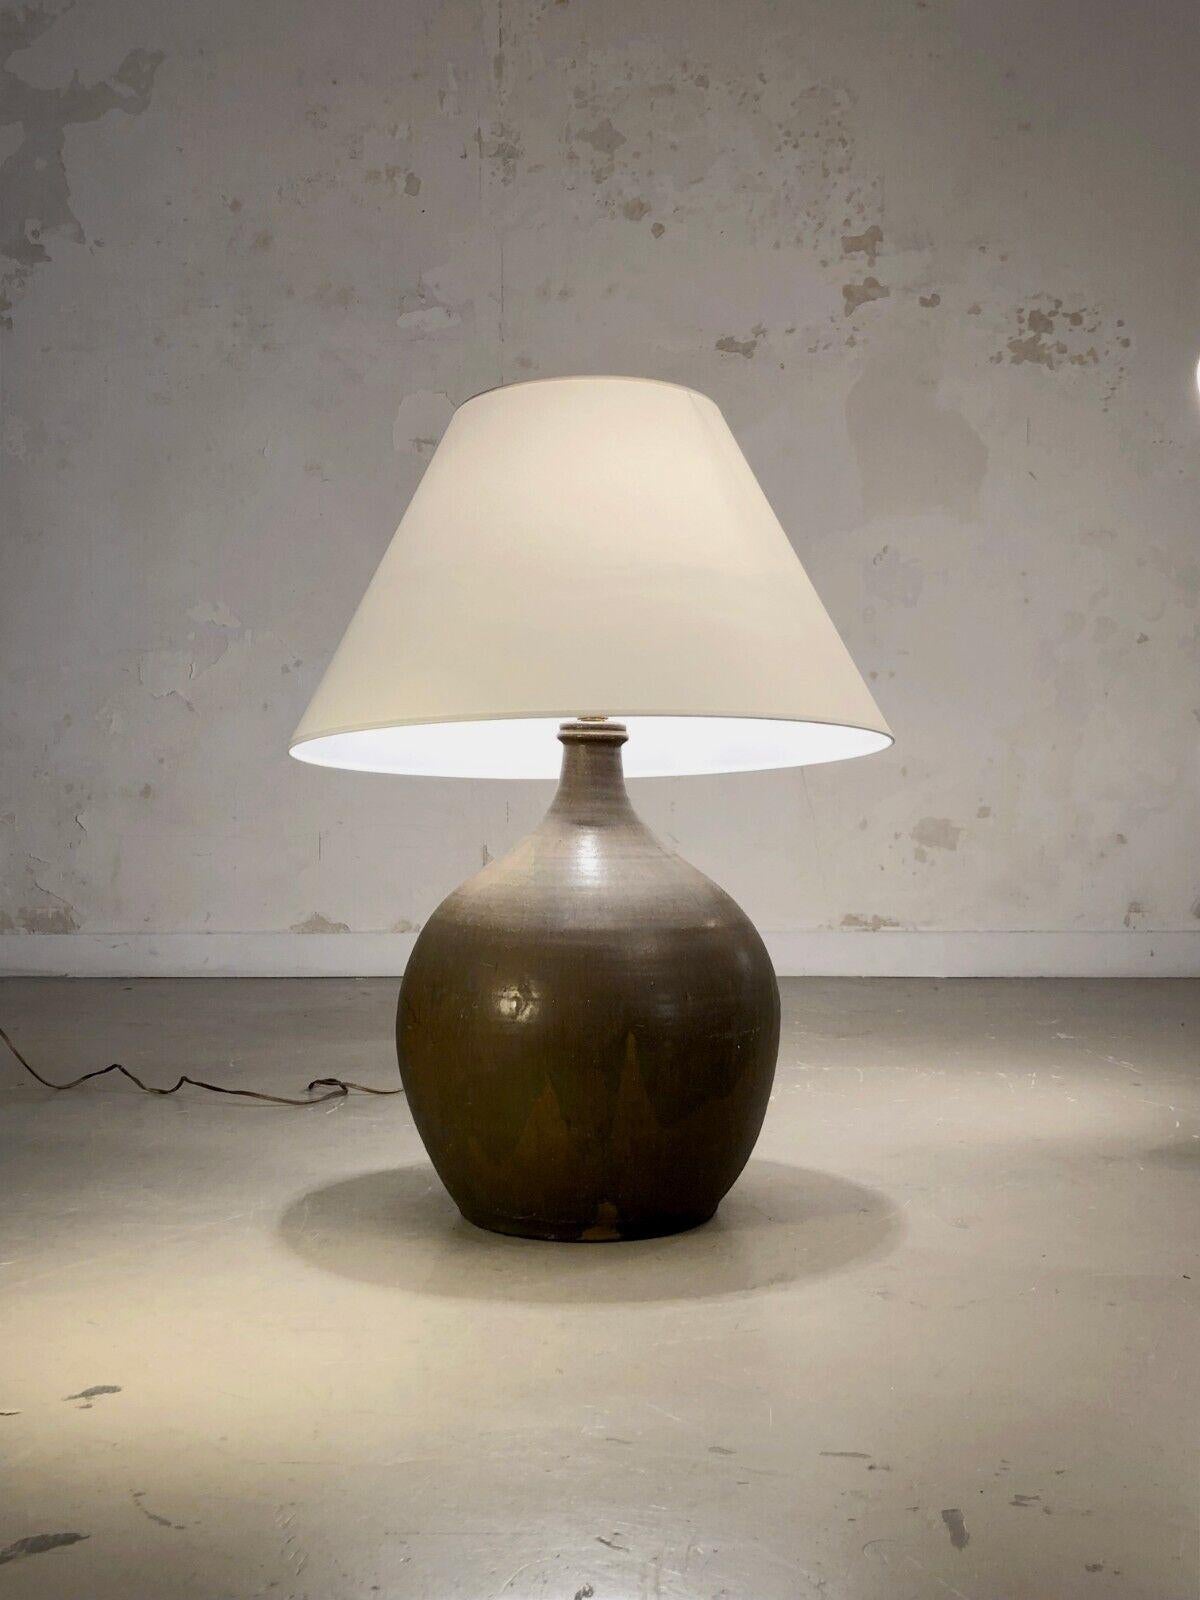 A very large table or floor lamp with a generous body, Modernist, Free-Form, Brutalist, Rustic-Modern, in thick sandstone with random dripping decorations, without signature, to be attributed, La Borne, France 1970.

A SECOND VERY SIMILAR LAMP IS ON